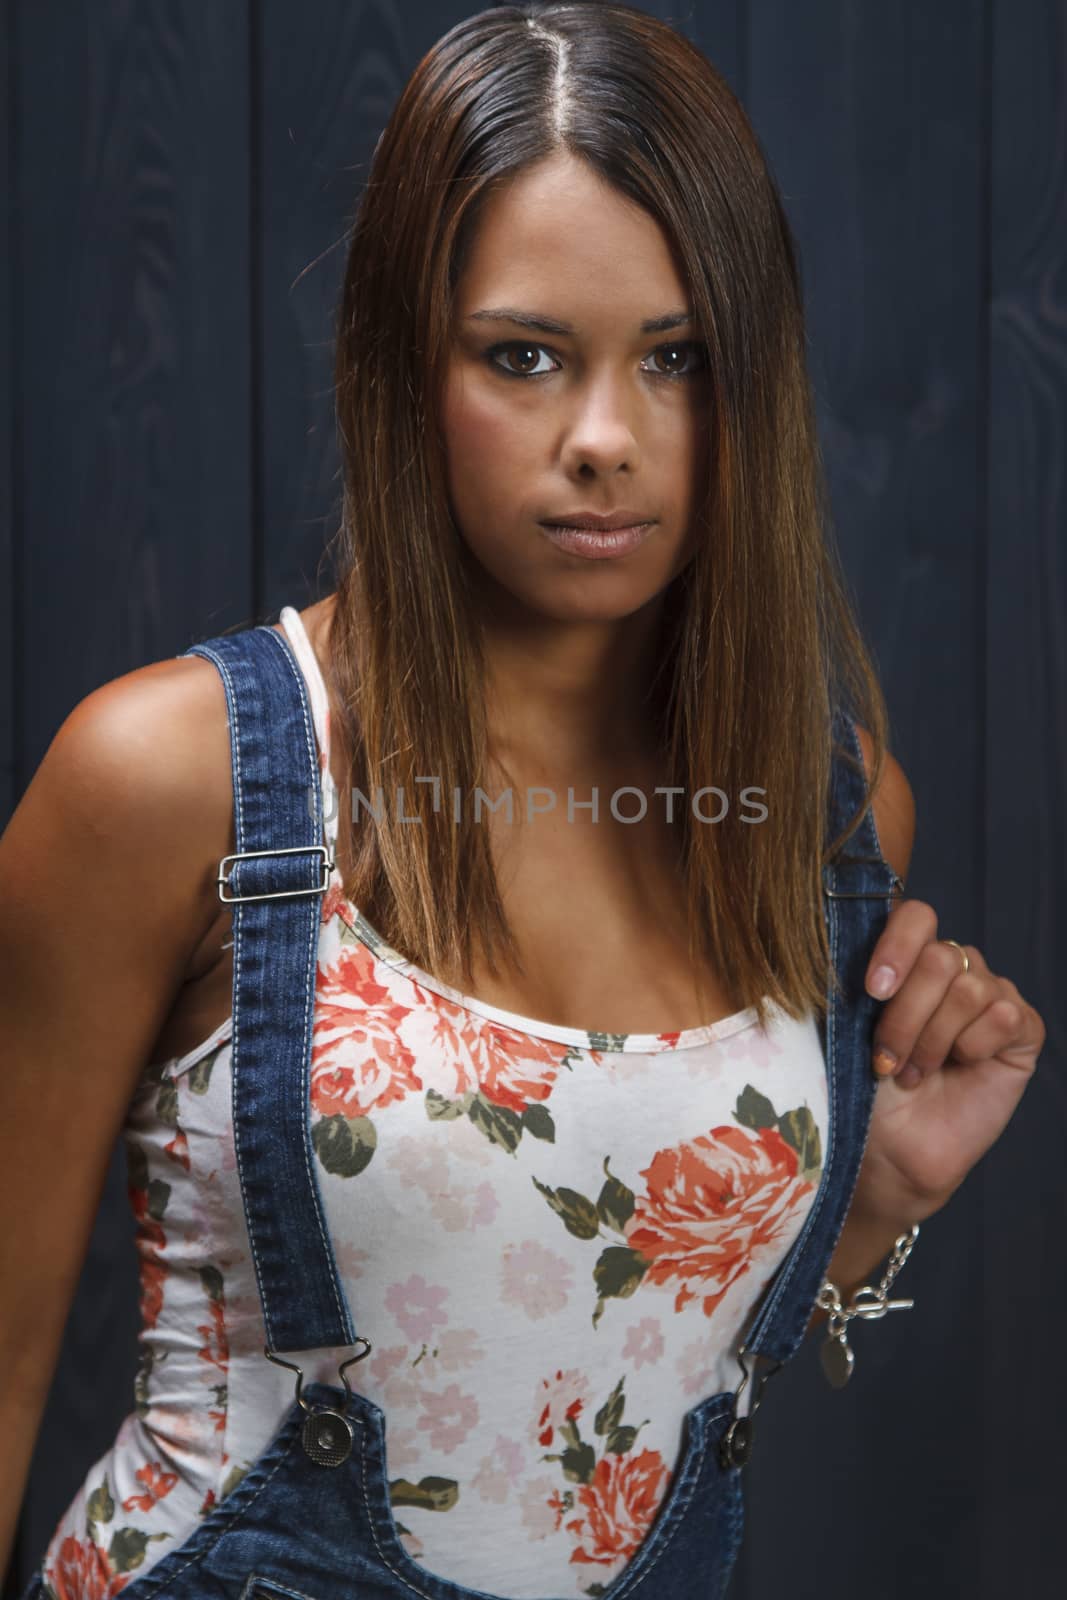 twenty something girl beautiful with floweral pattern tank top and jeans overalls